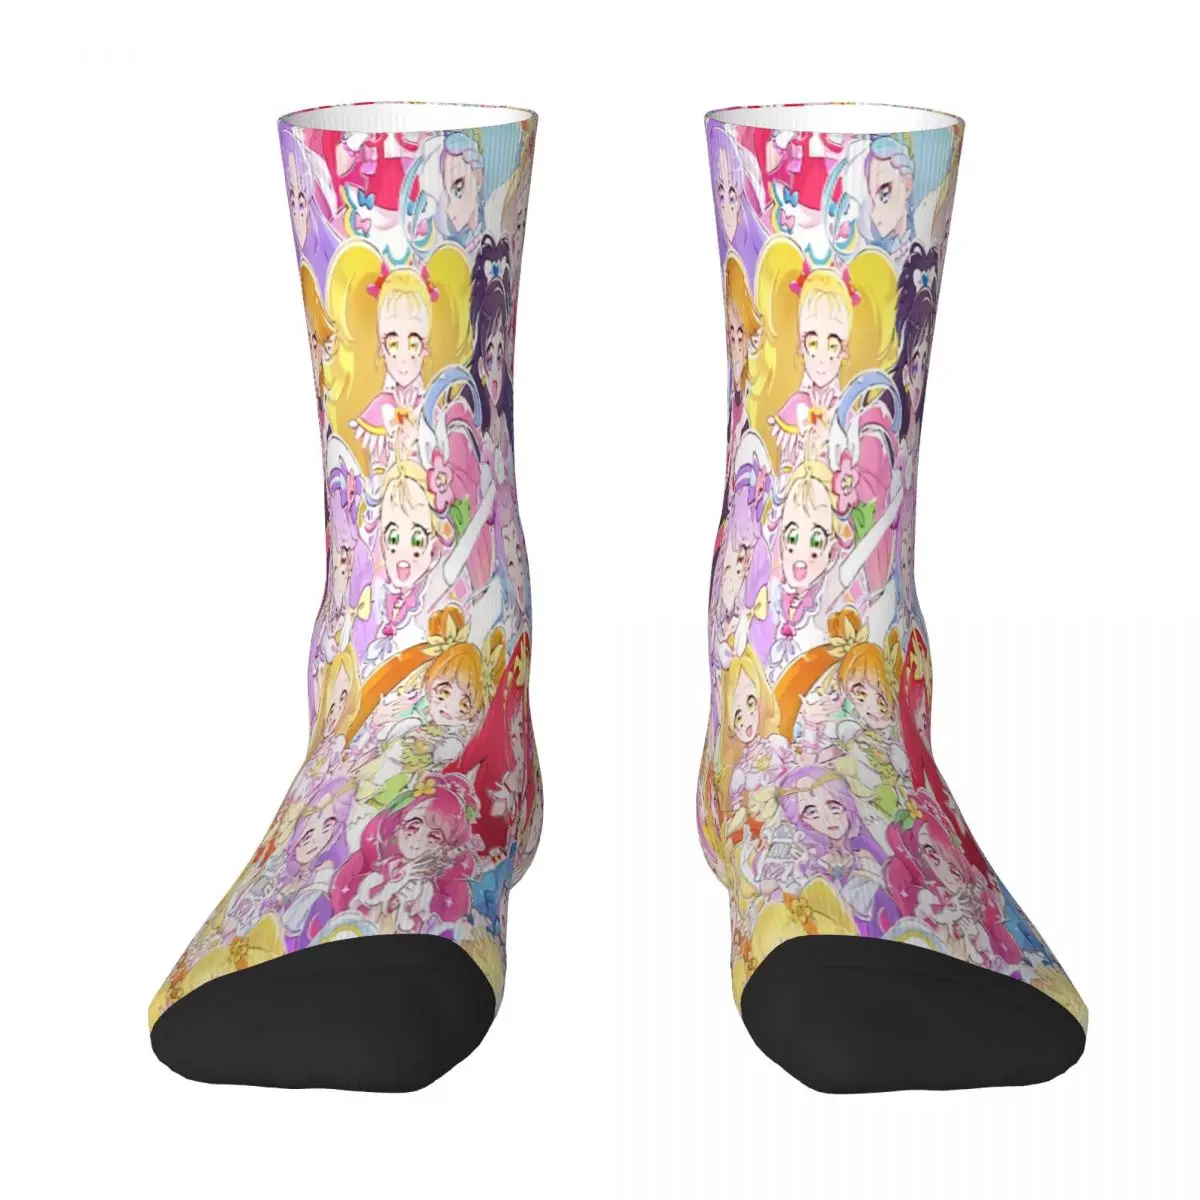 

Delicious Party All Together Pretty Cure Precure Princess Anime Sock Socks Men Women Polyester Stockings Customizable Sweetshirt